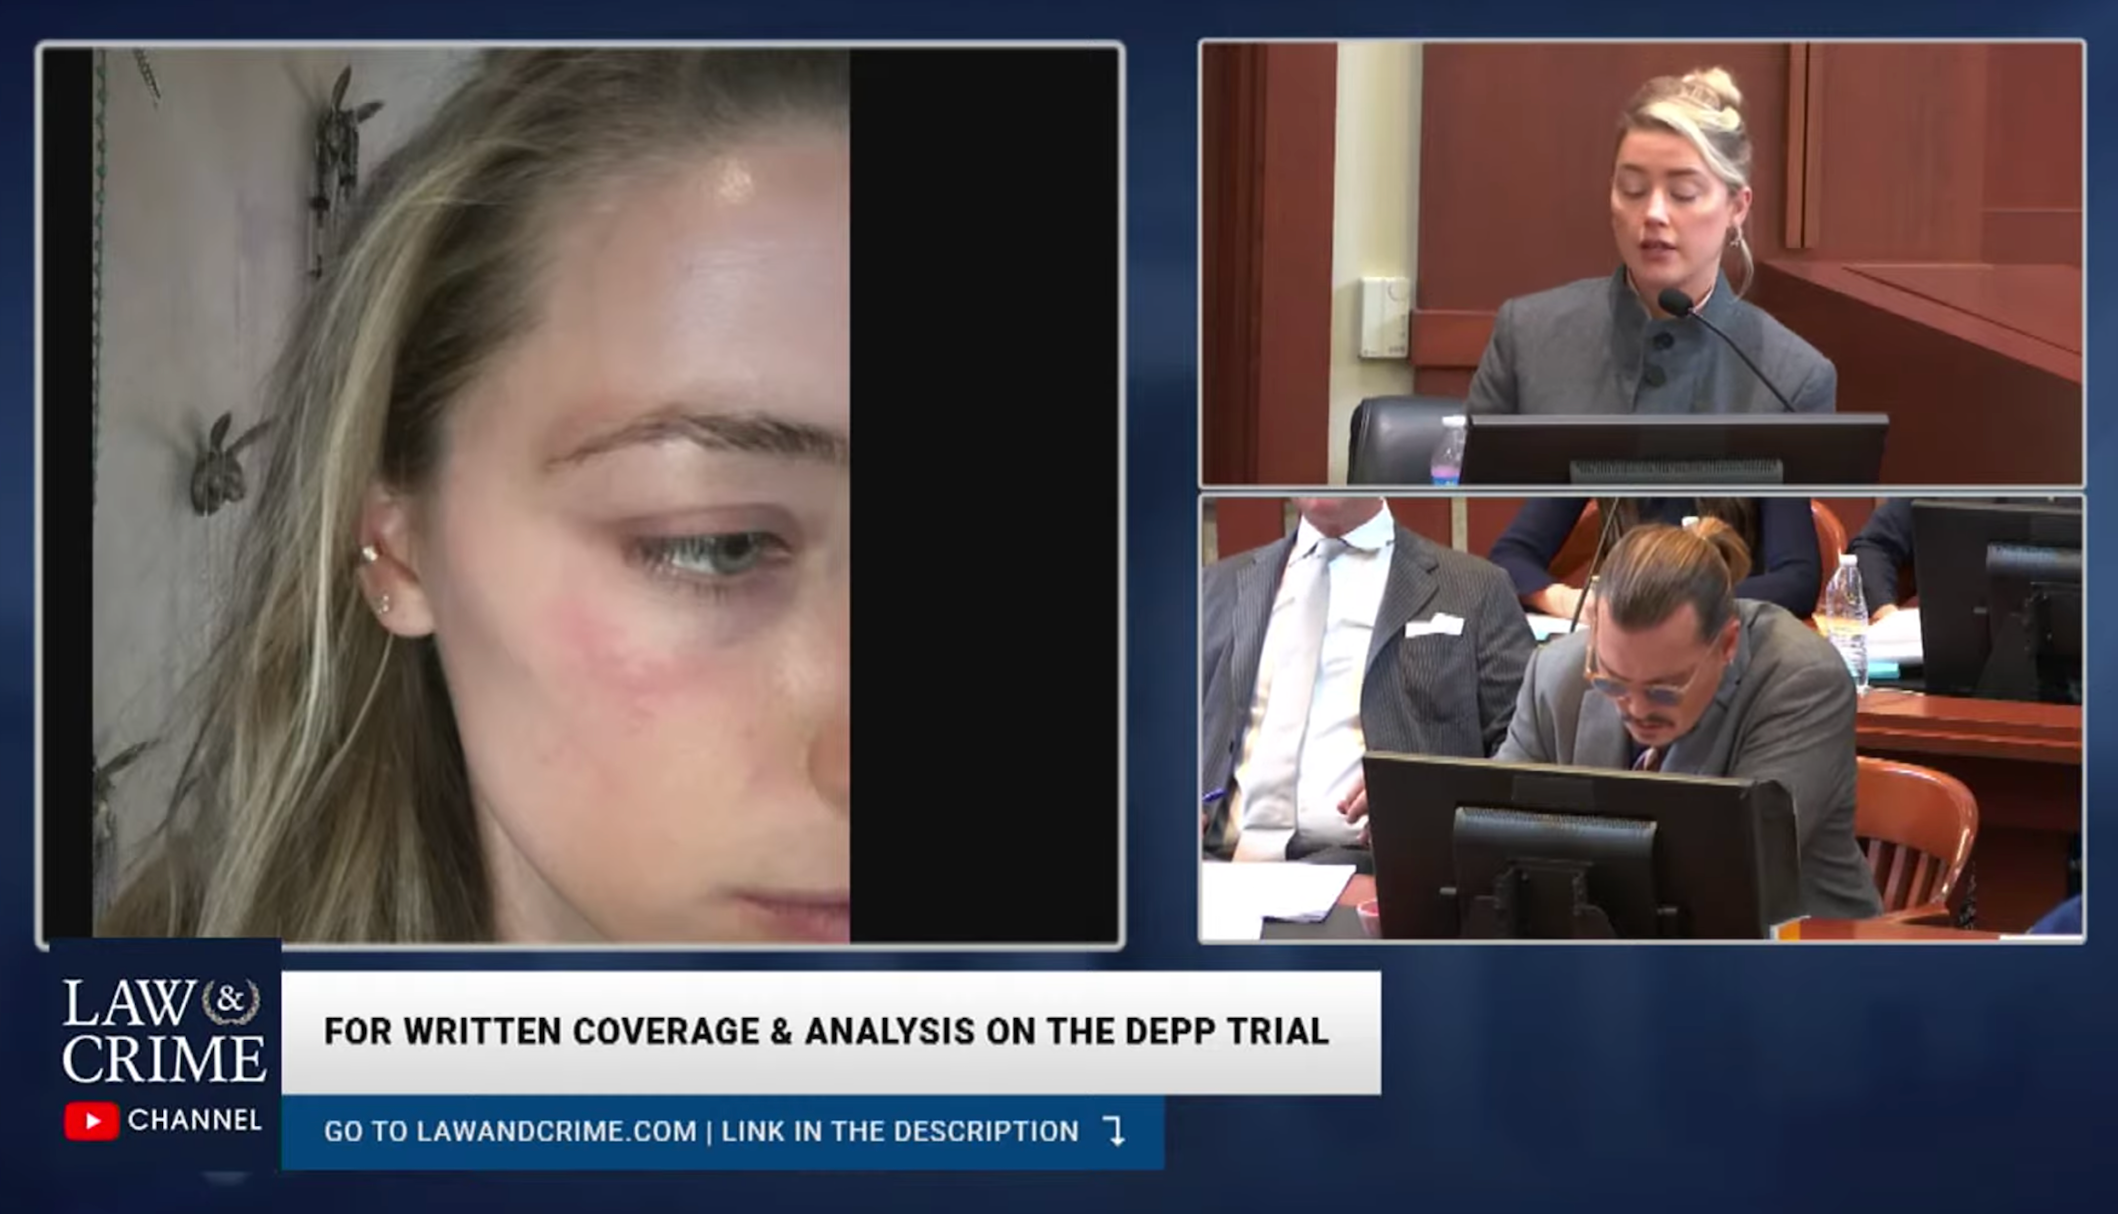 The jury was shown photos of Amber Heard’s face as evidence